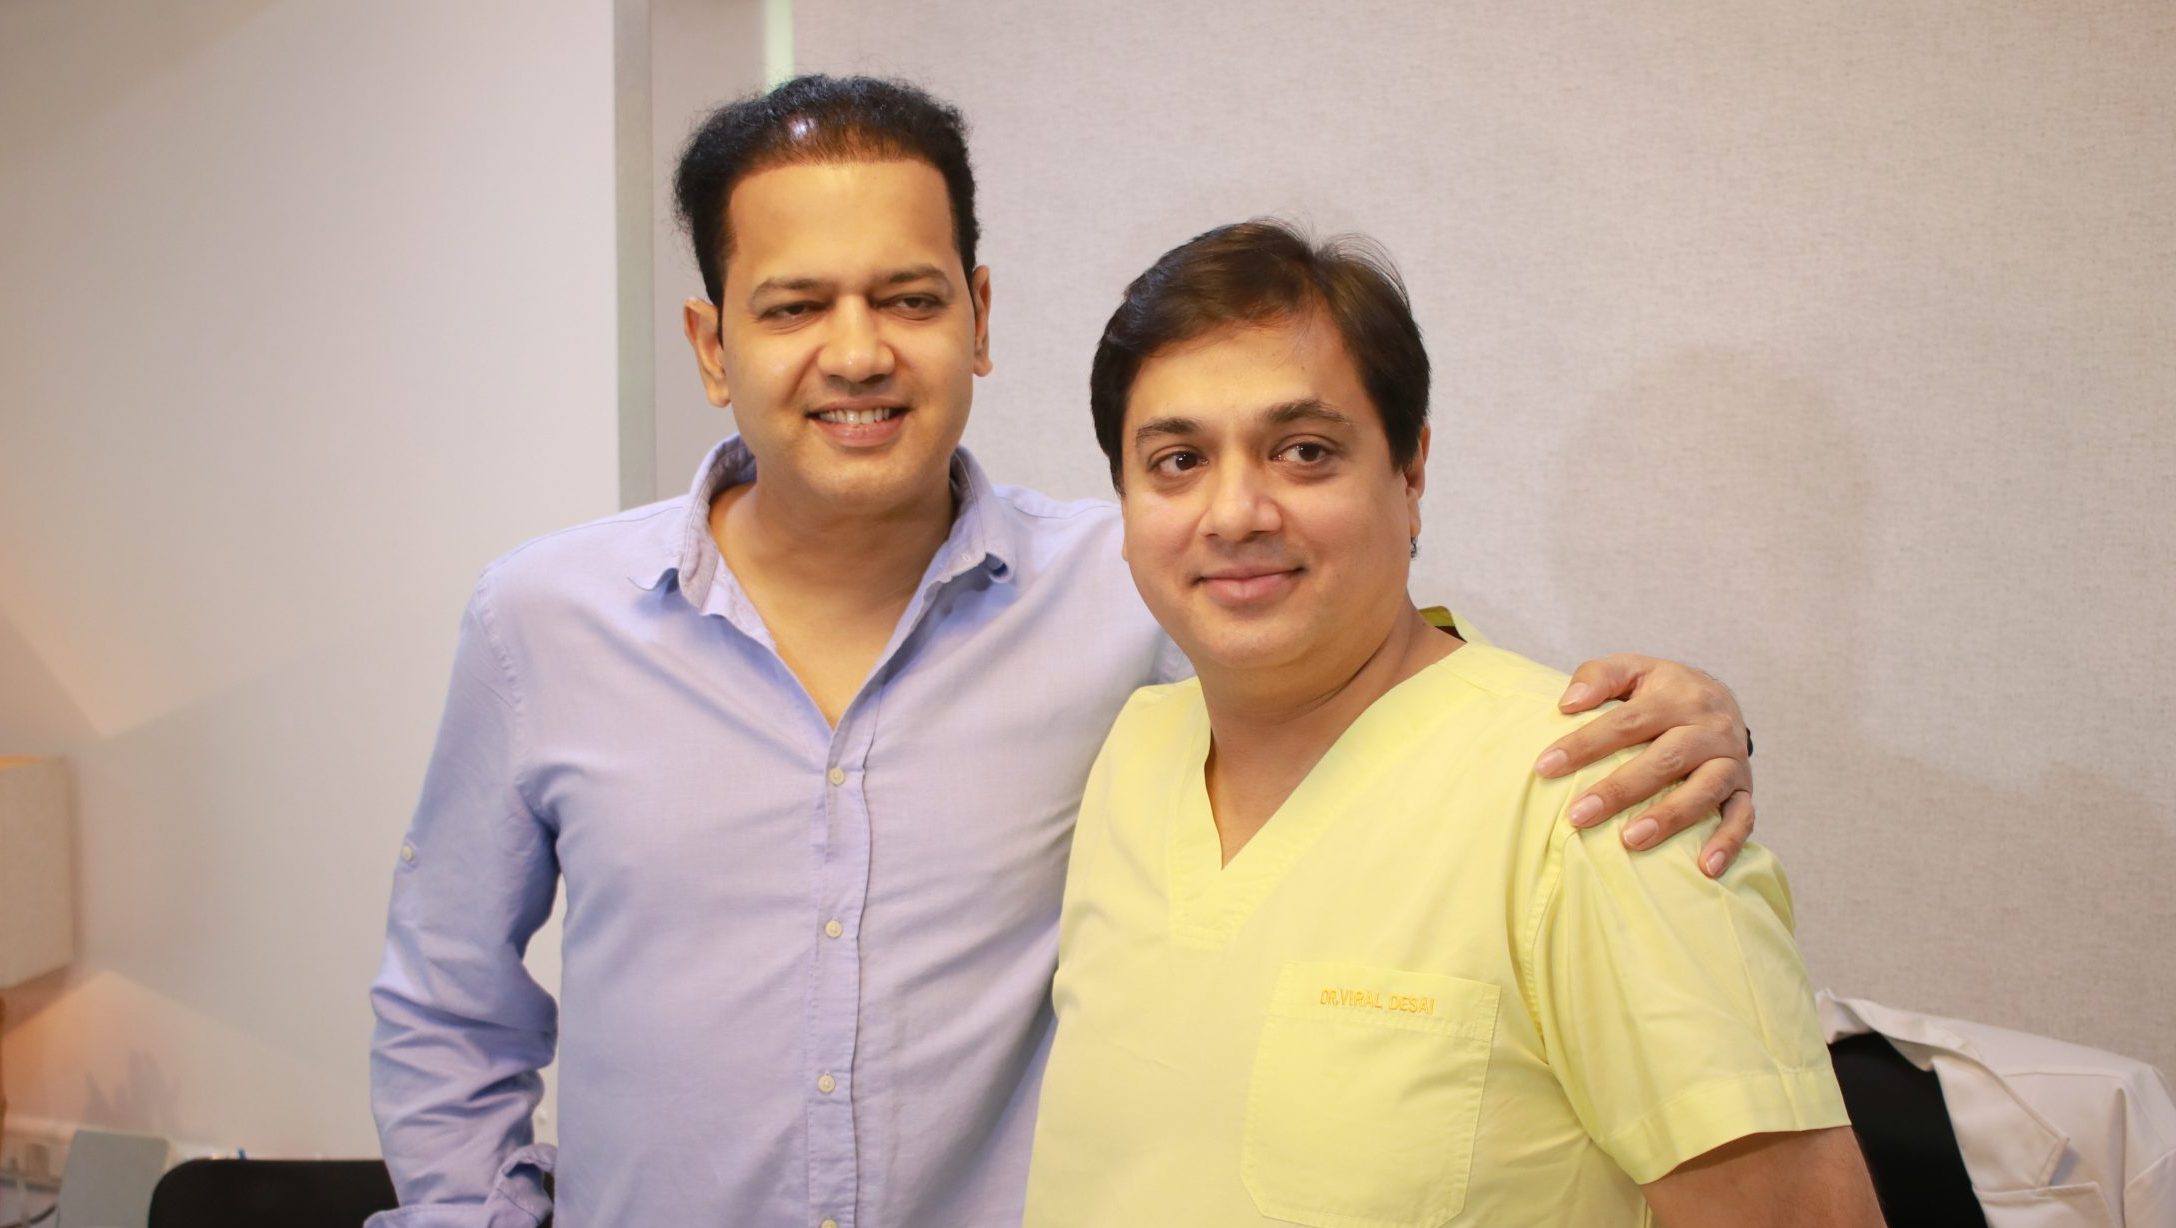 Rahul Mahajan now has a younger and radiant face, thanks to Celebrity cosmetic and plastic surgeon Dr. Viral Desai!